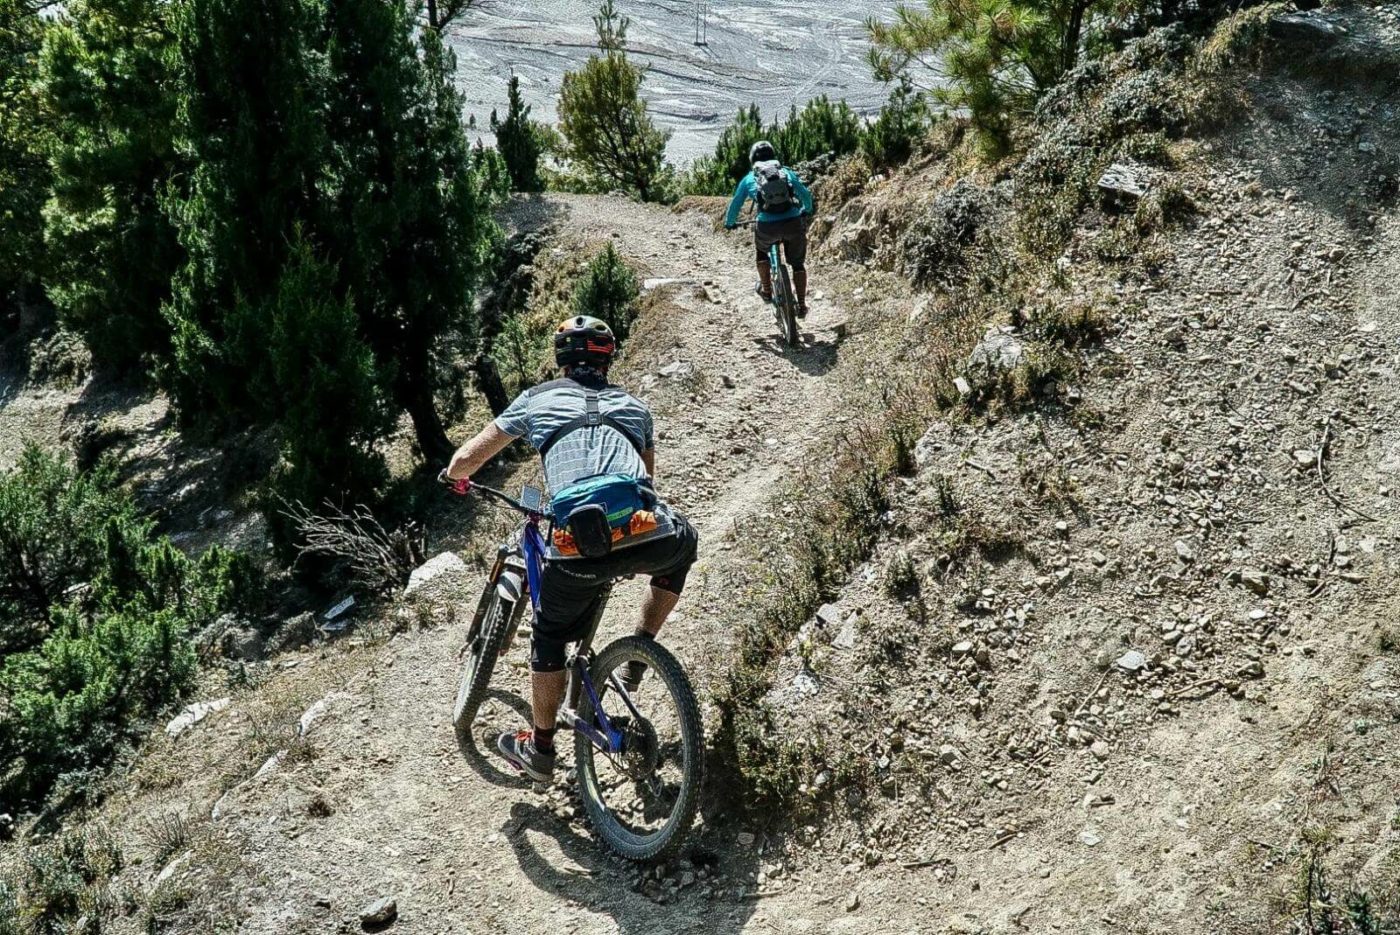 Two riders going down a mountain path in Nepal on the last day of the tour